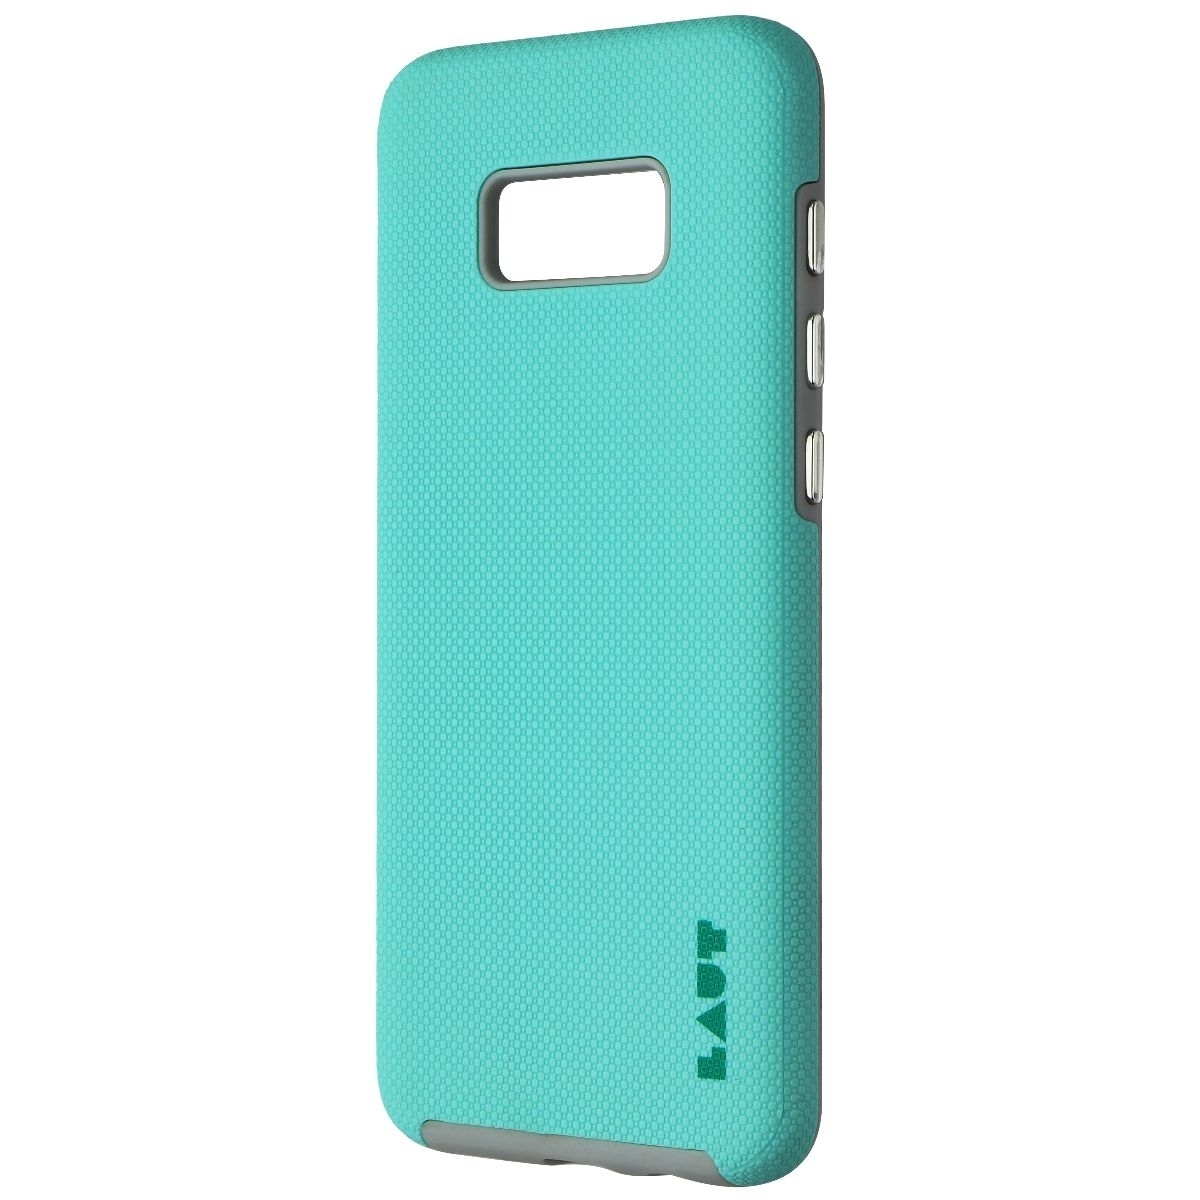 Laut Shield Protective Series Case For Samsung Galaxy S8 - Mint (Refurbished)